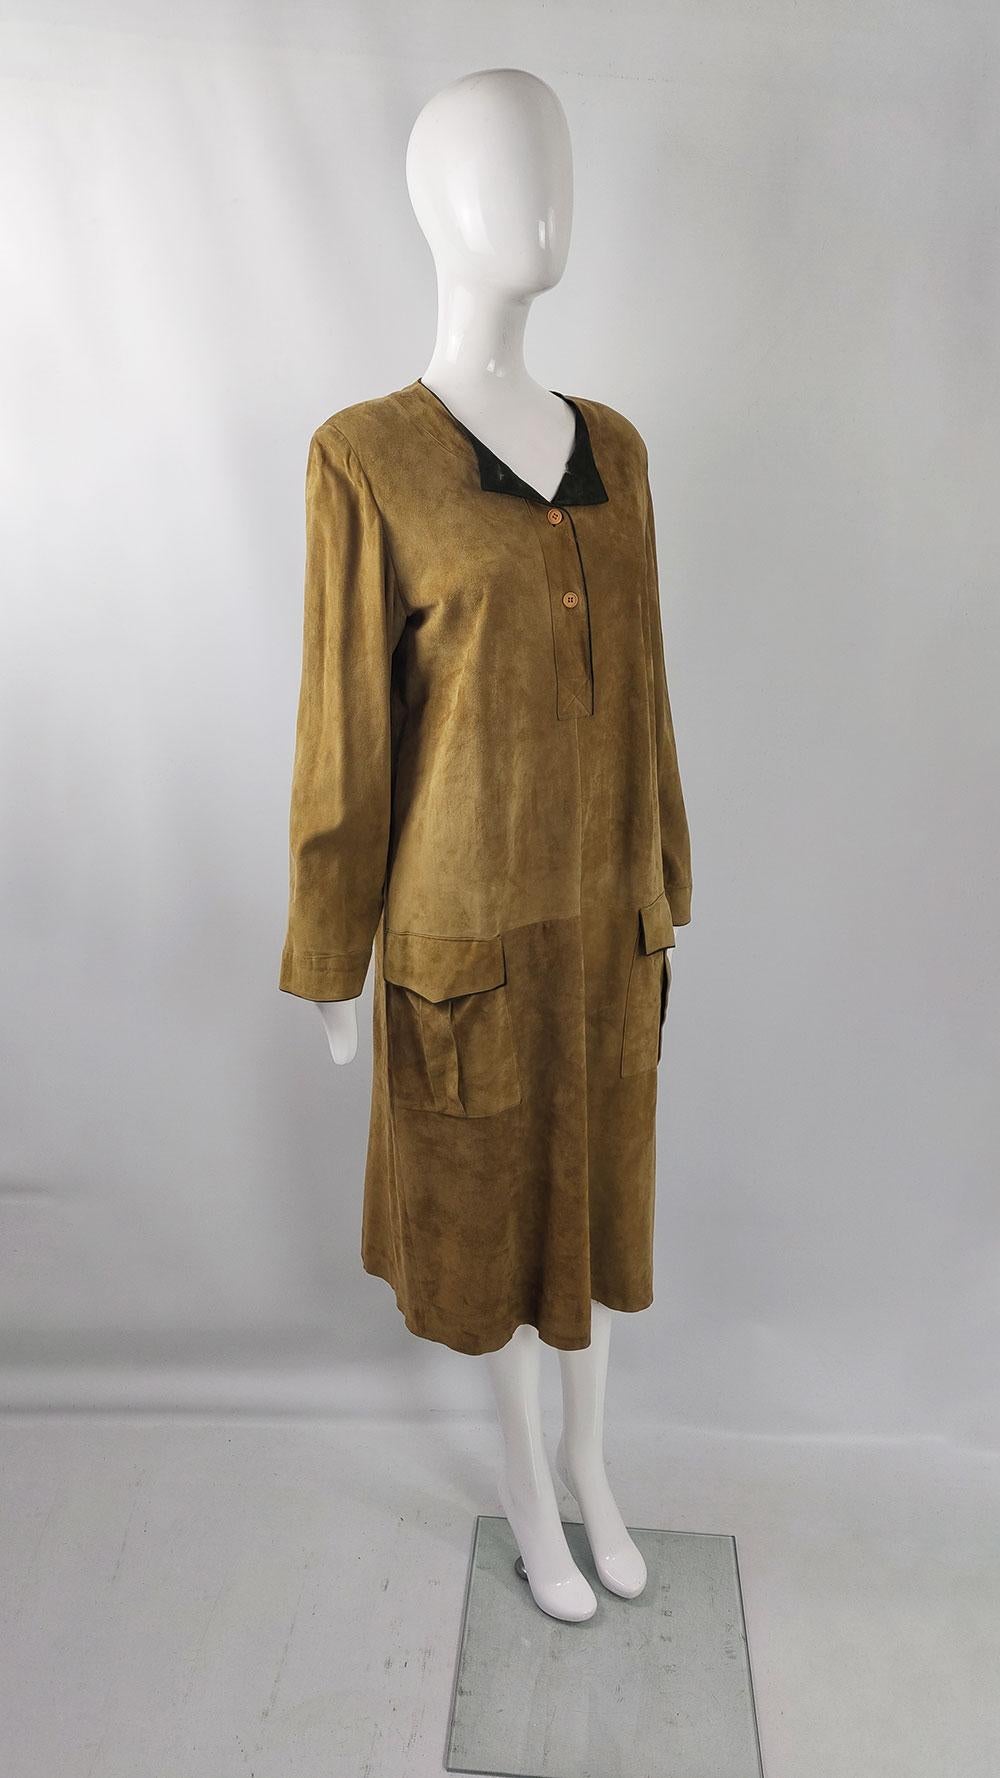 Mario Valentino Vintage Tan & Green Suede Long Sleeve Shift Dress For Sale 3